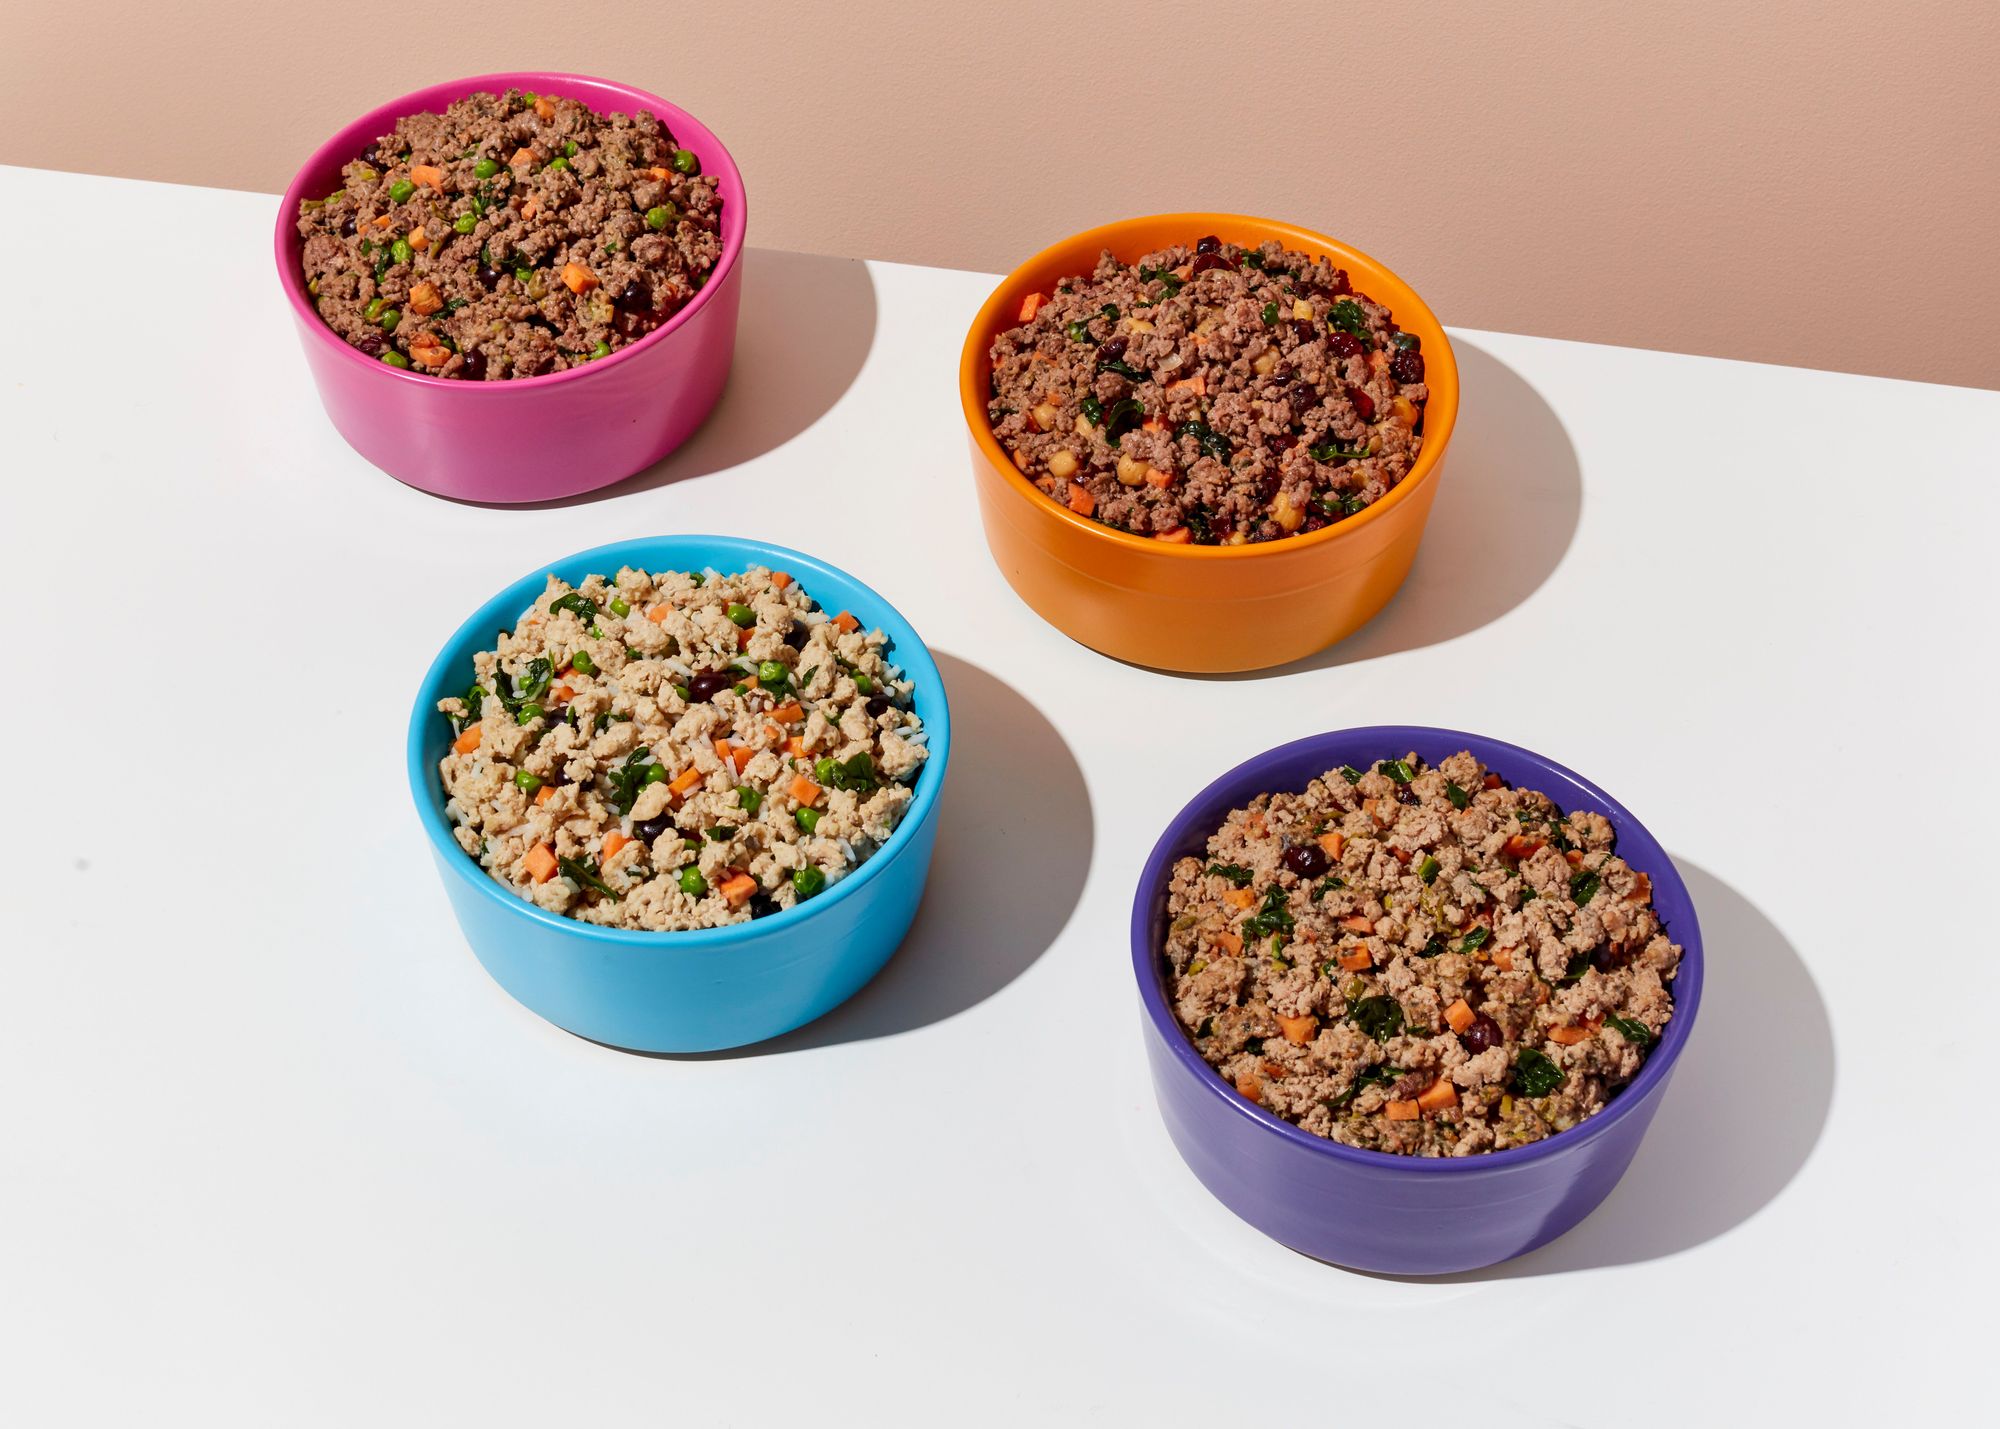 ollie-s-freshly-cooked-dog-food-in-colorful-bowls-on-white-table